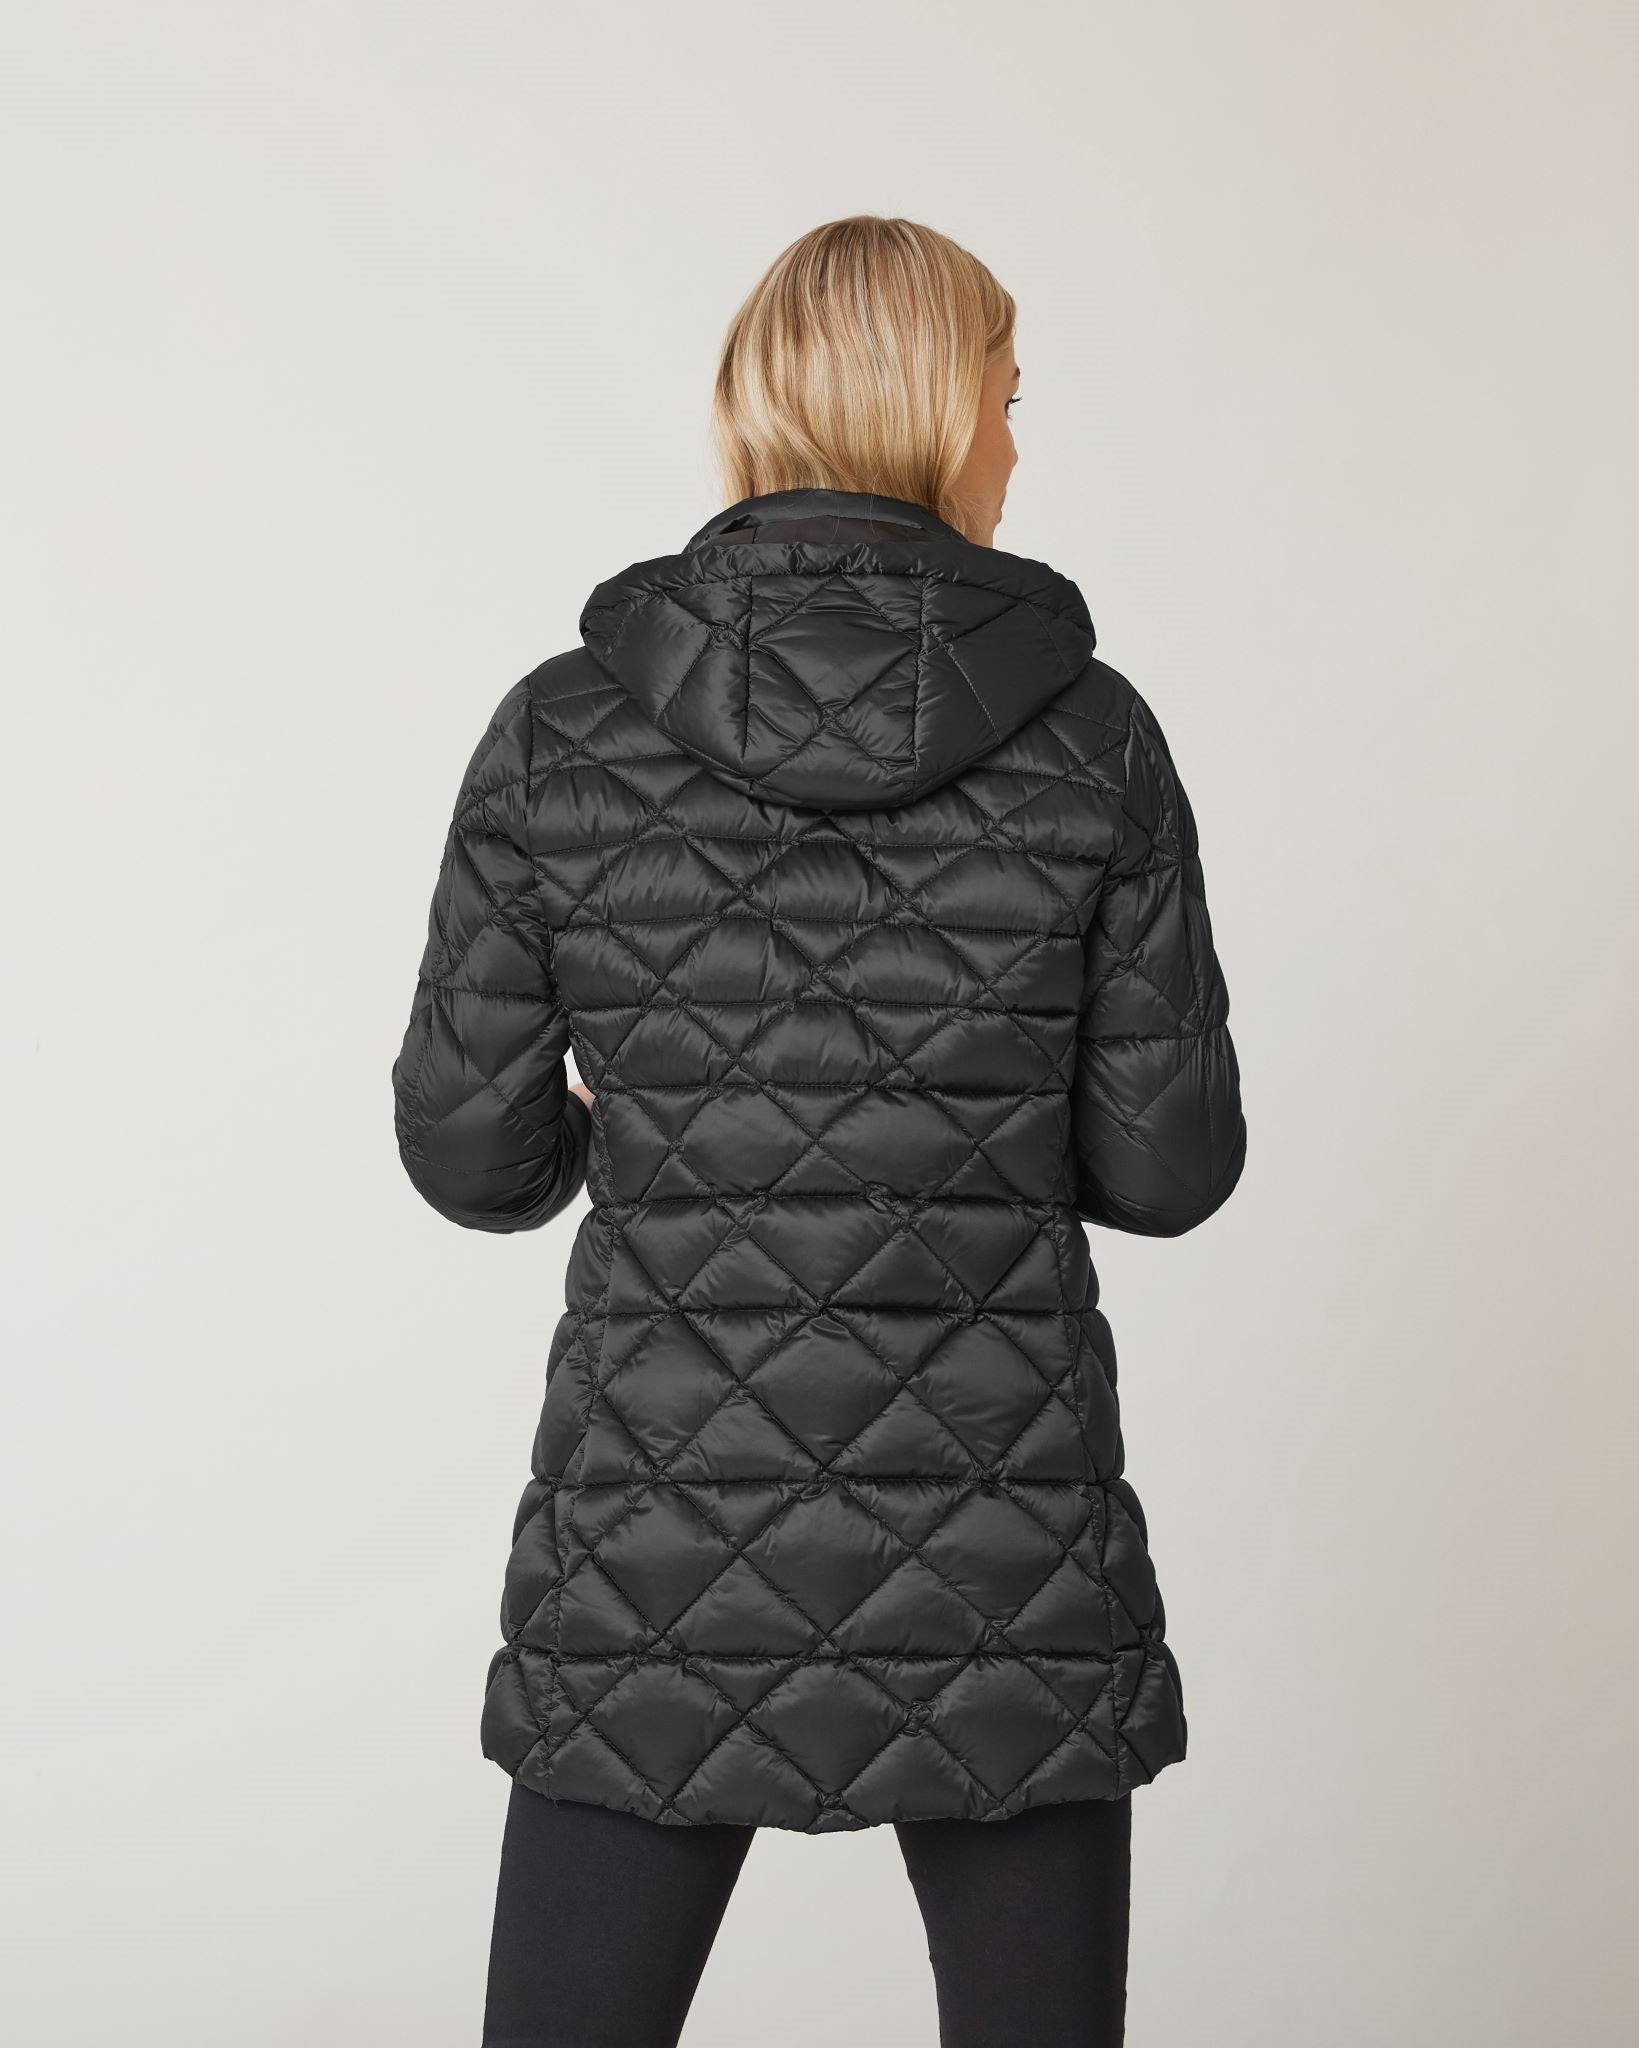 | Occasion | Every For Choices Winter Jackets Timeless